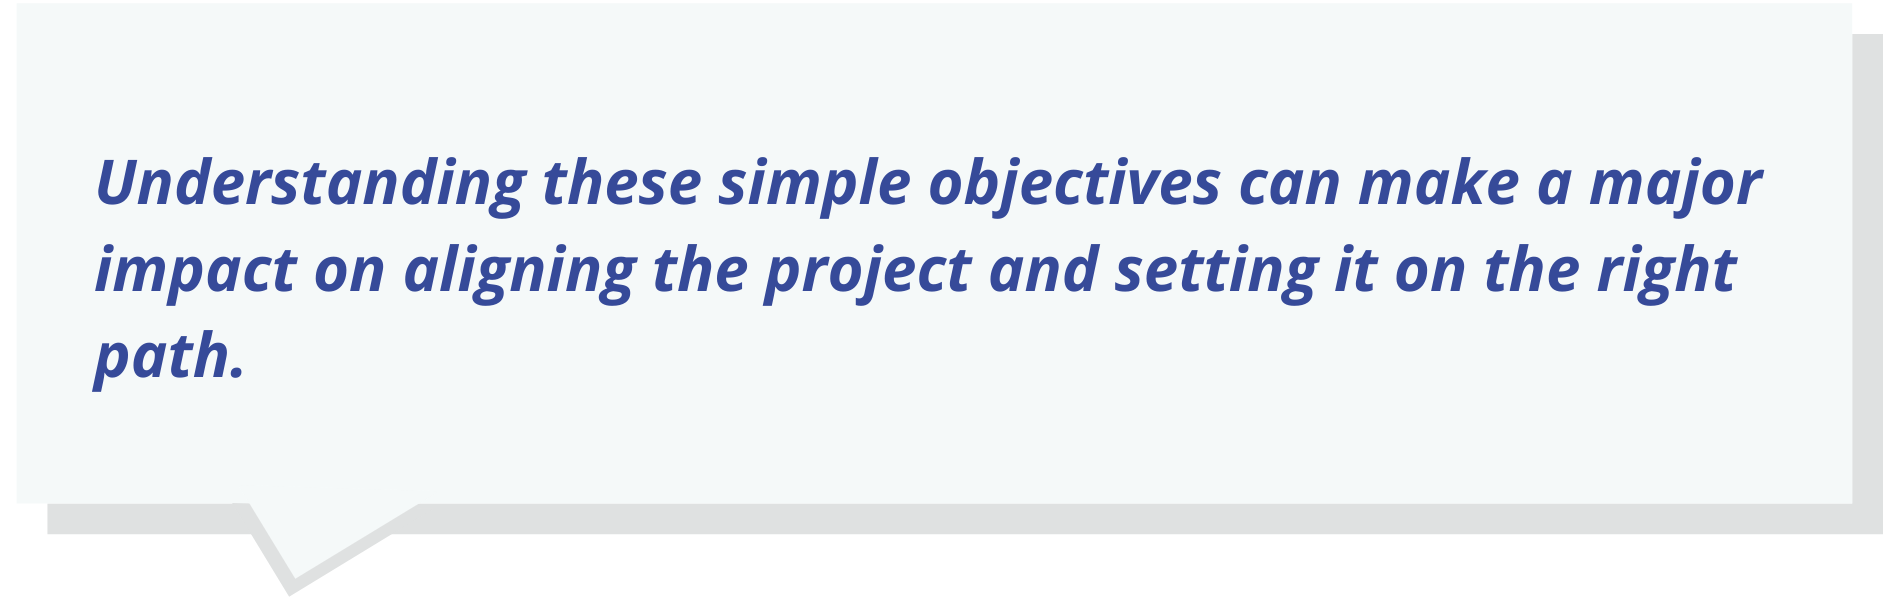 Understanding these simple objectives can make a major impact on aligning the project and setting it on the right path.